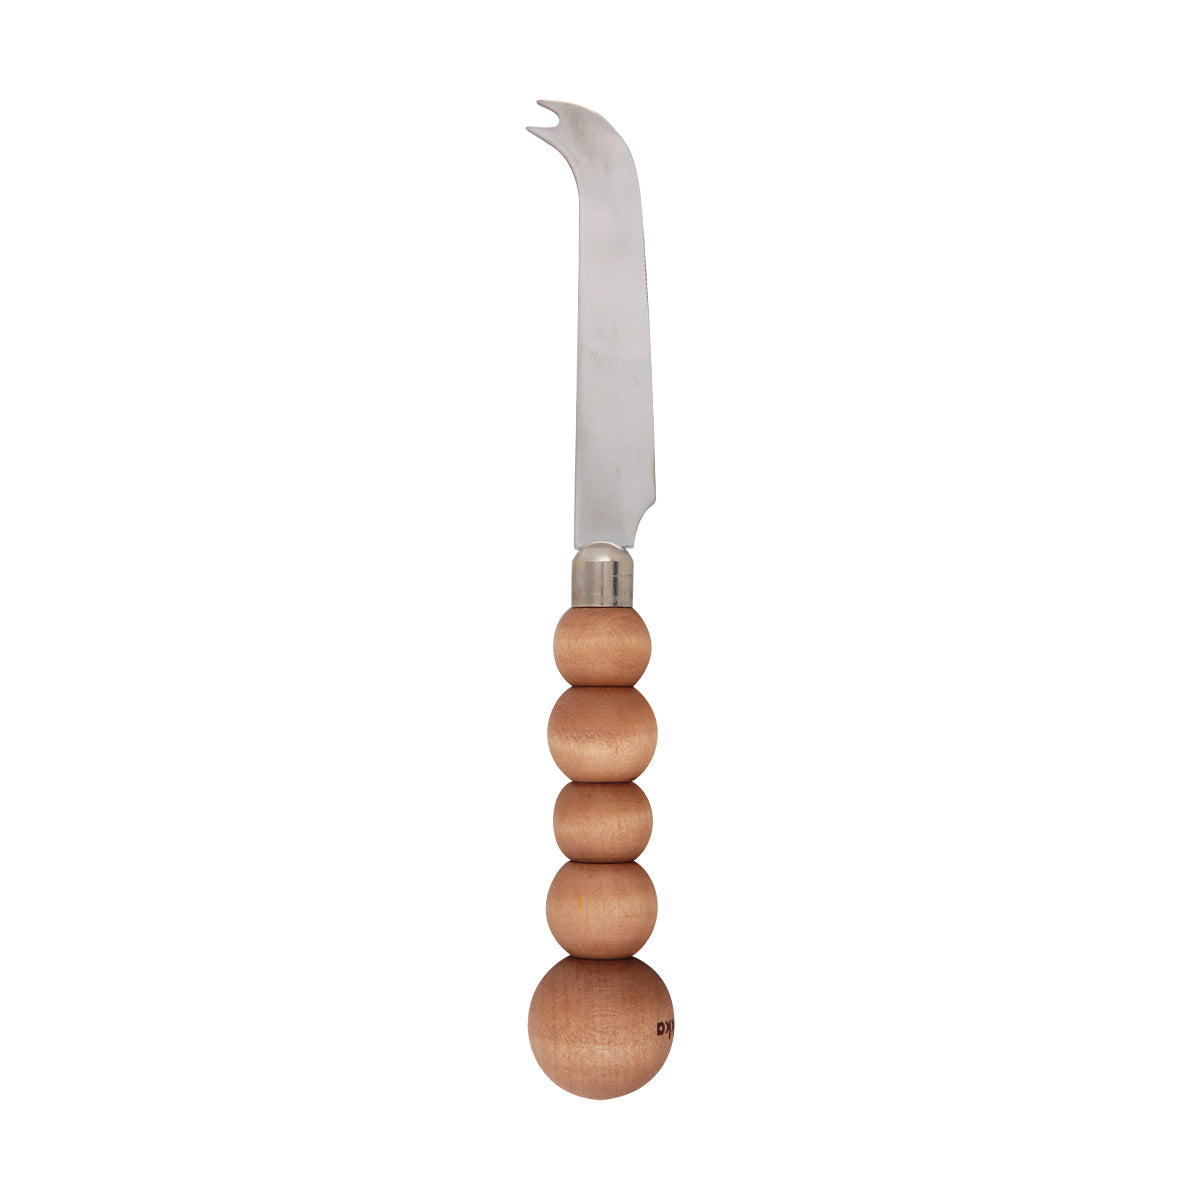 Puisto cheese knife